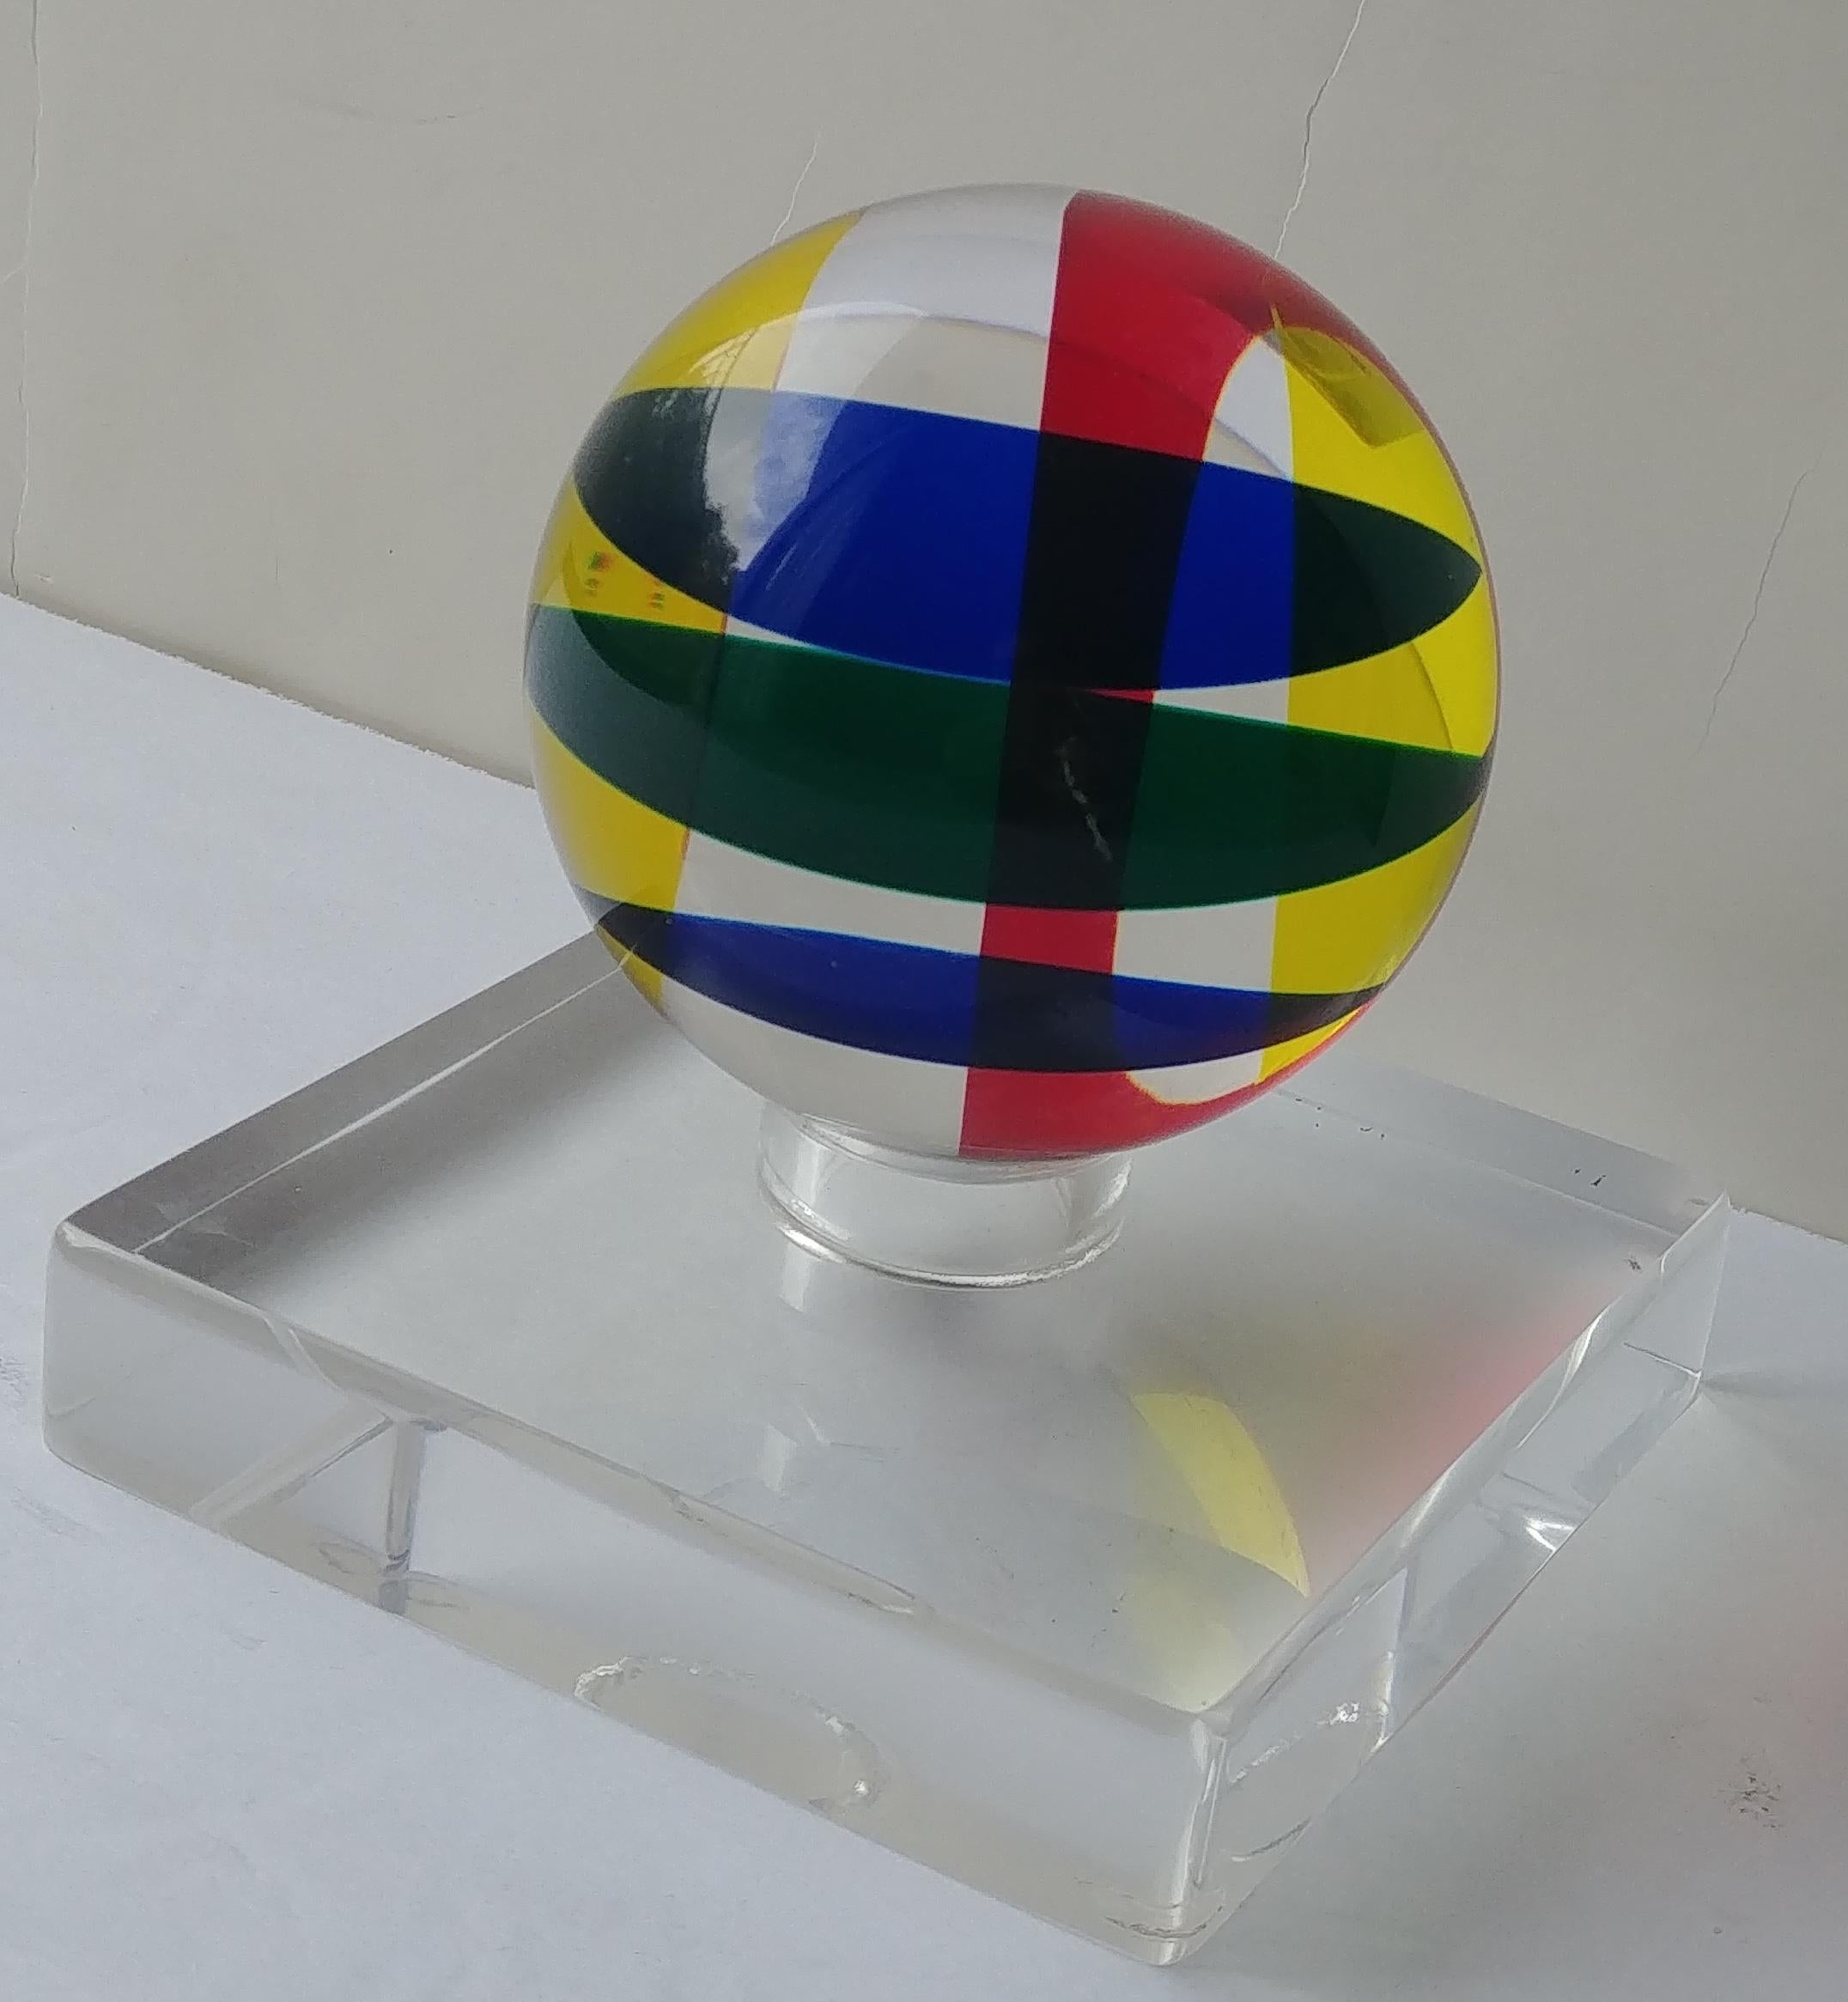 Hand-Crafted Vasa, Velizar Mihich Acrylic, Ball, Sphere Sculpture, Signed, Dated